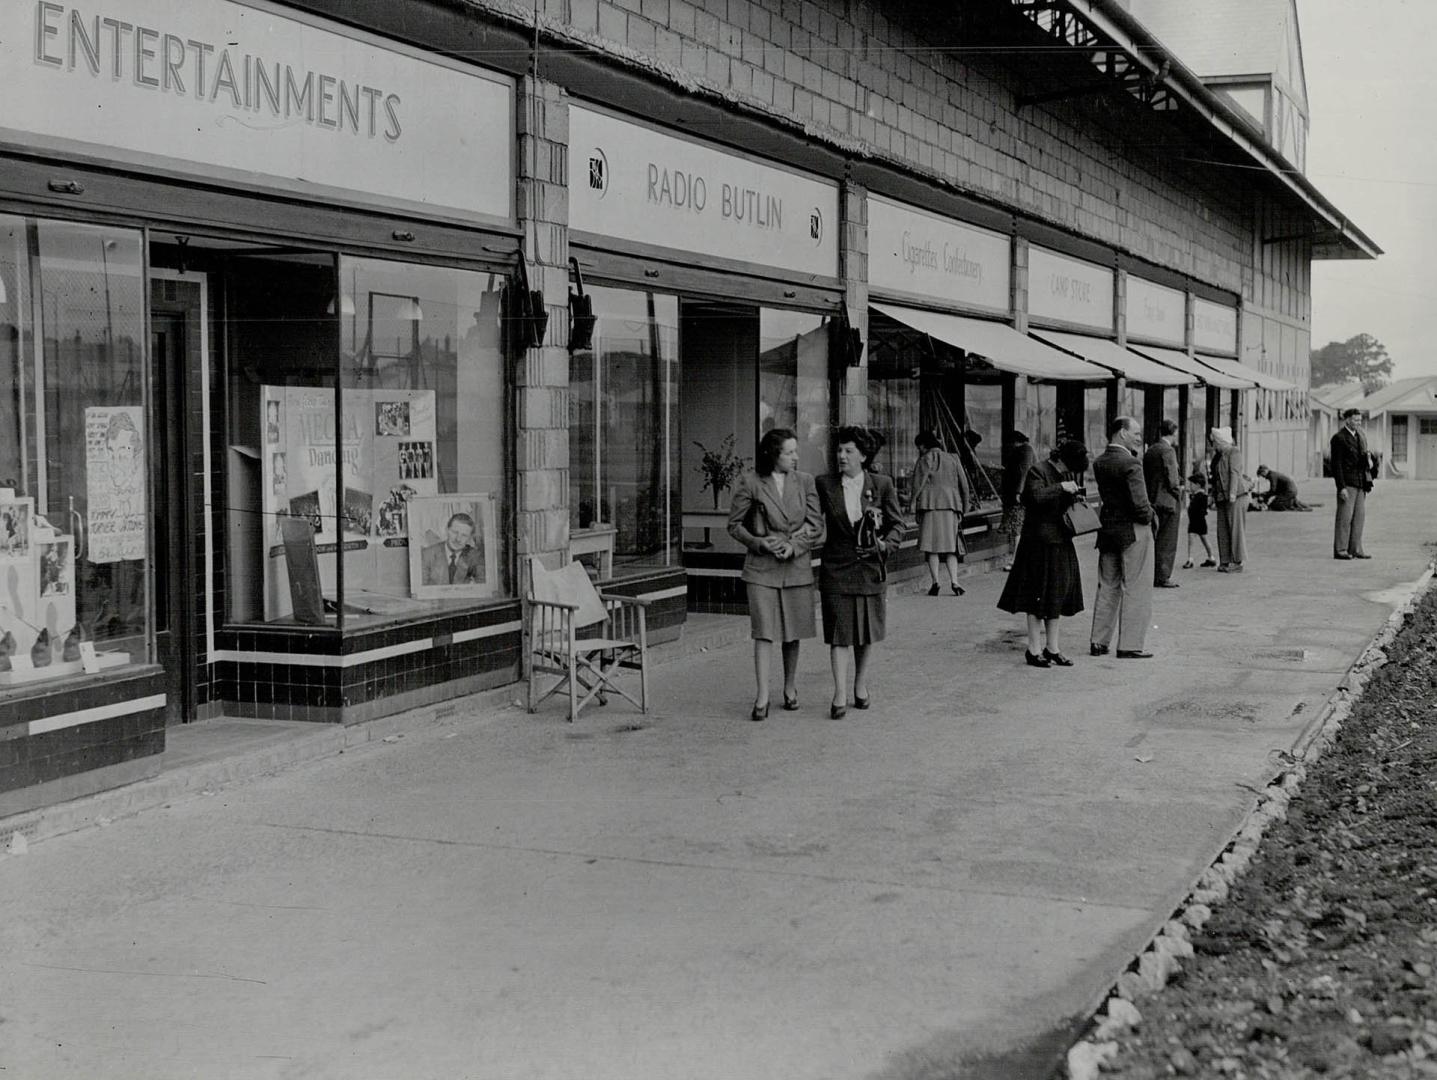 A view of a few of the shops at Clacton Camp